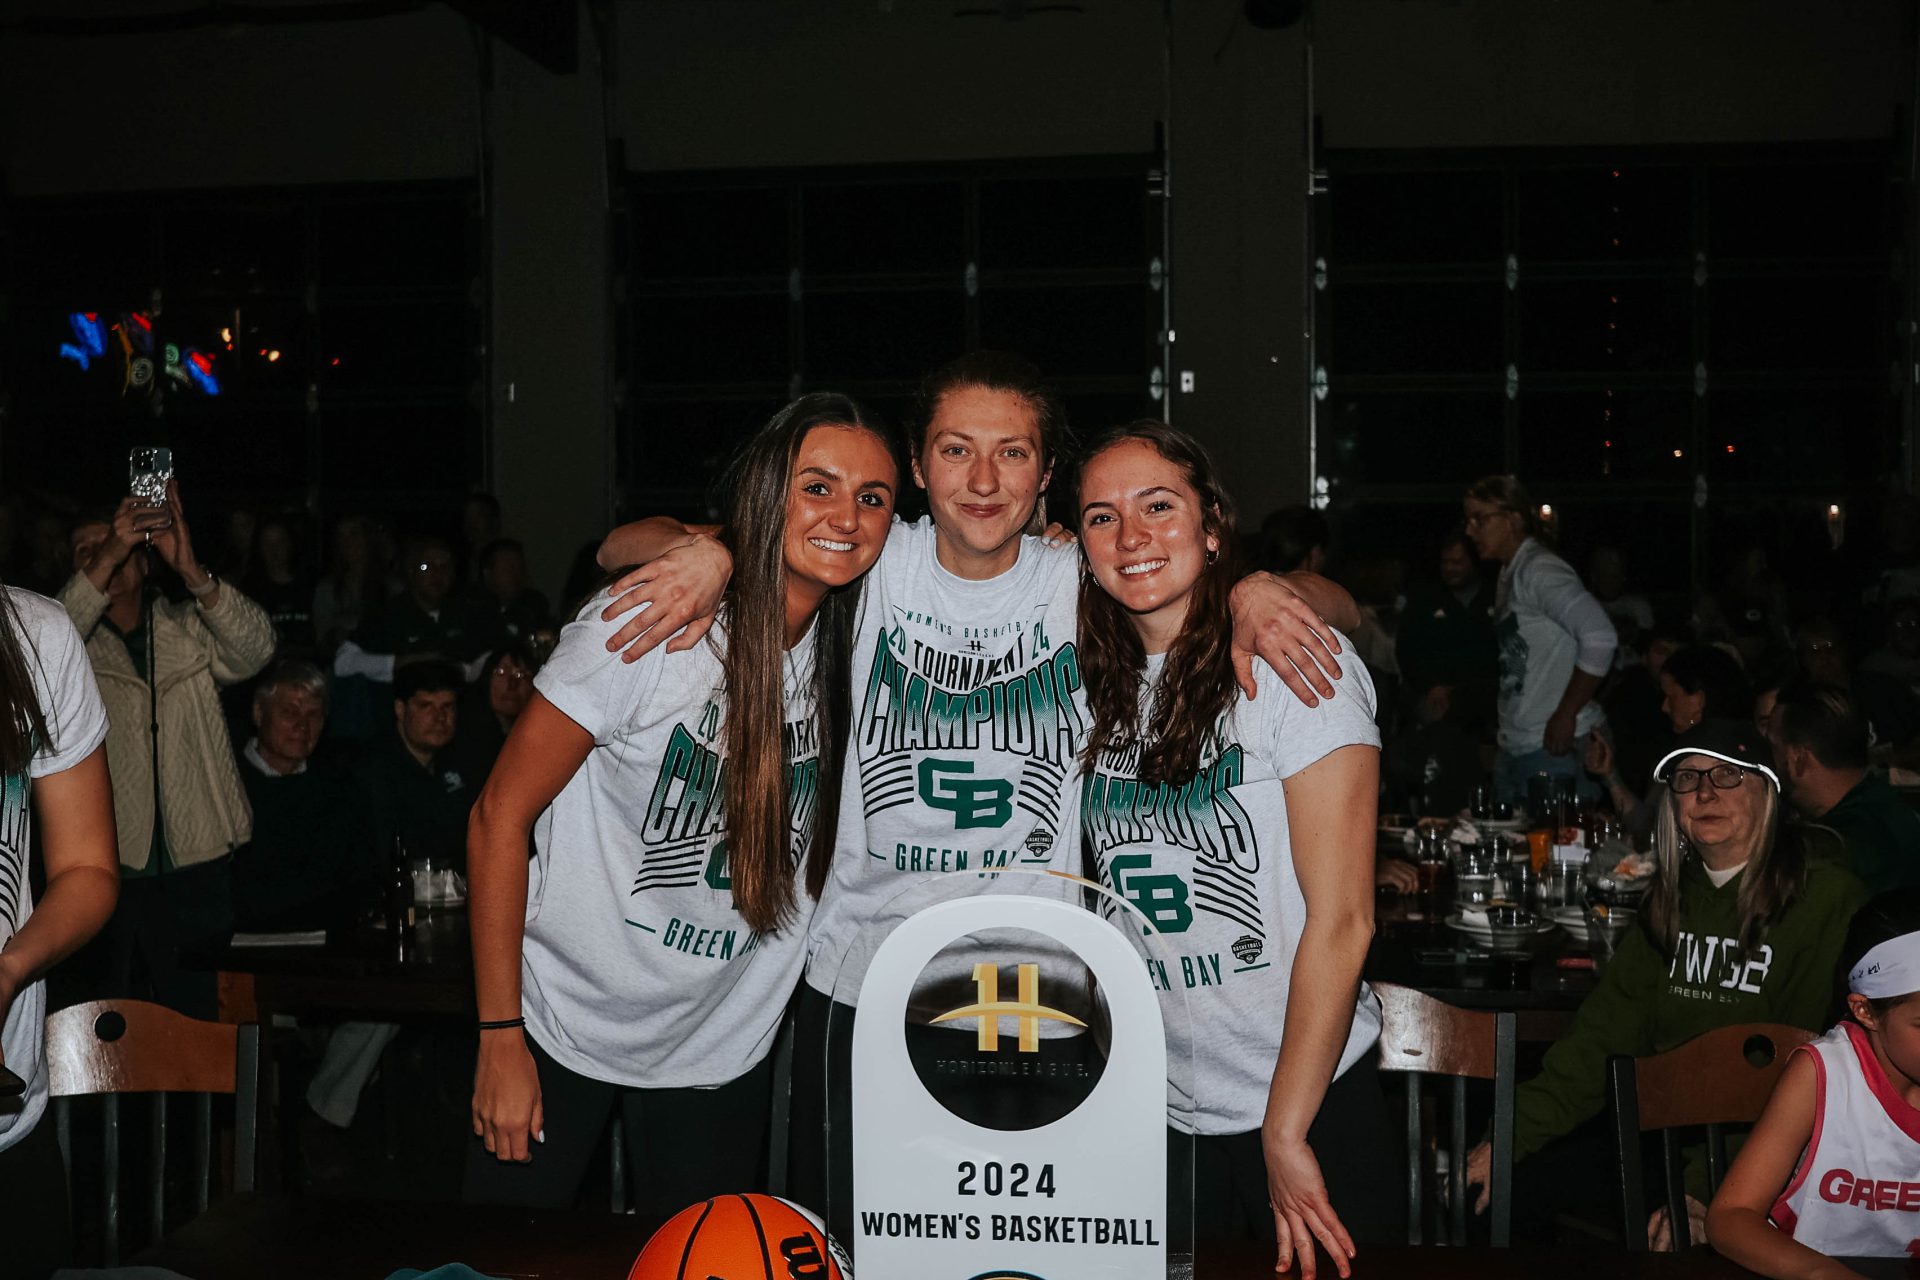 Emotional Triumph for Green Bay Women’s Team and Coach in March Madness - THE SPORTS ROOM